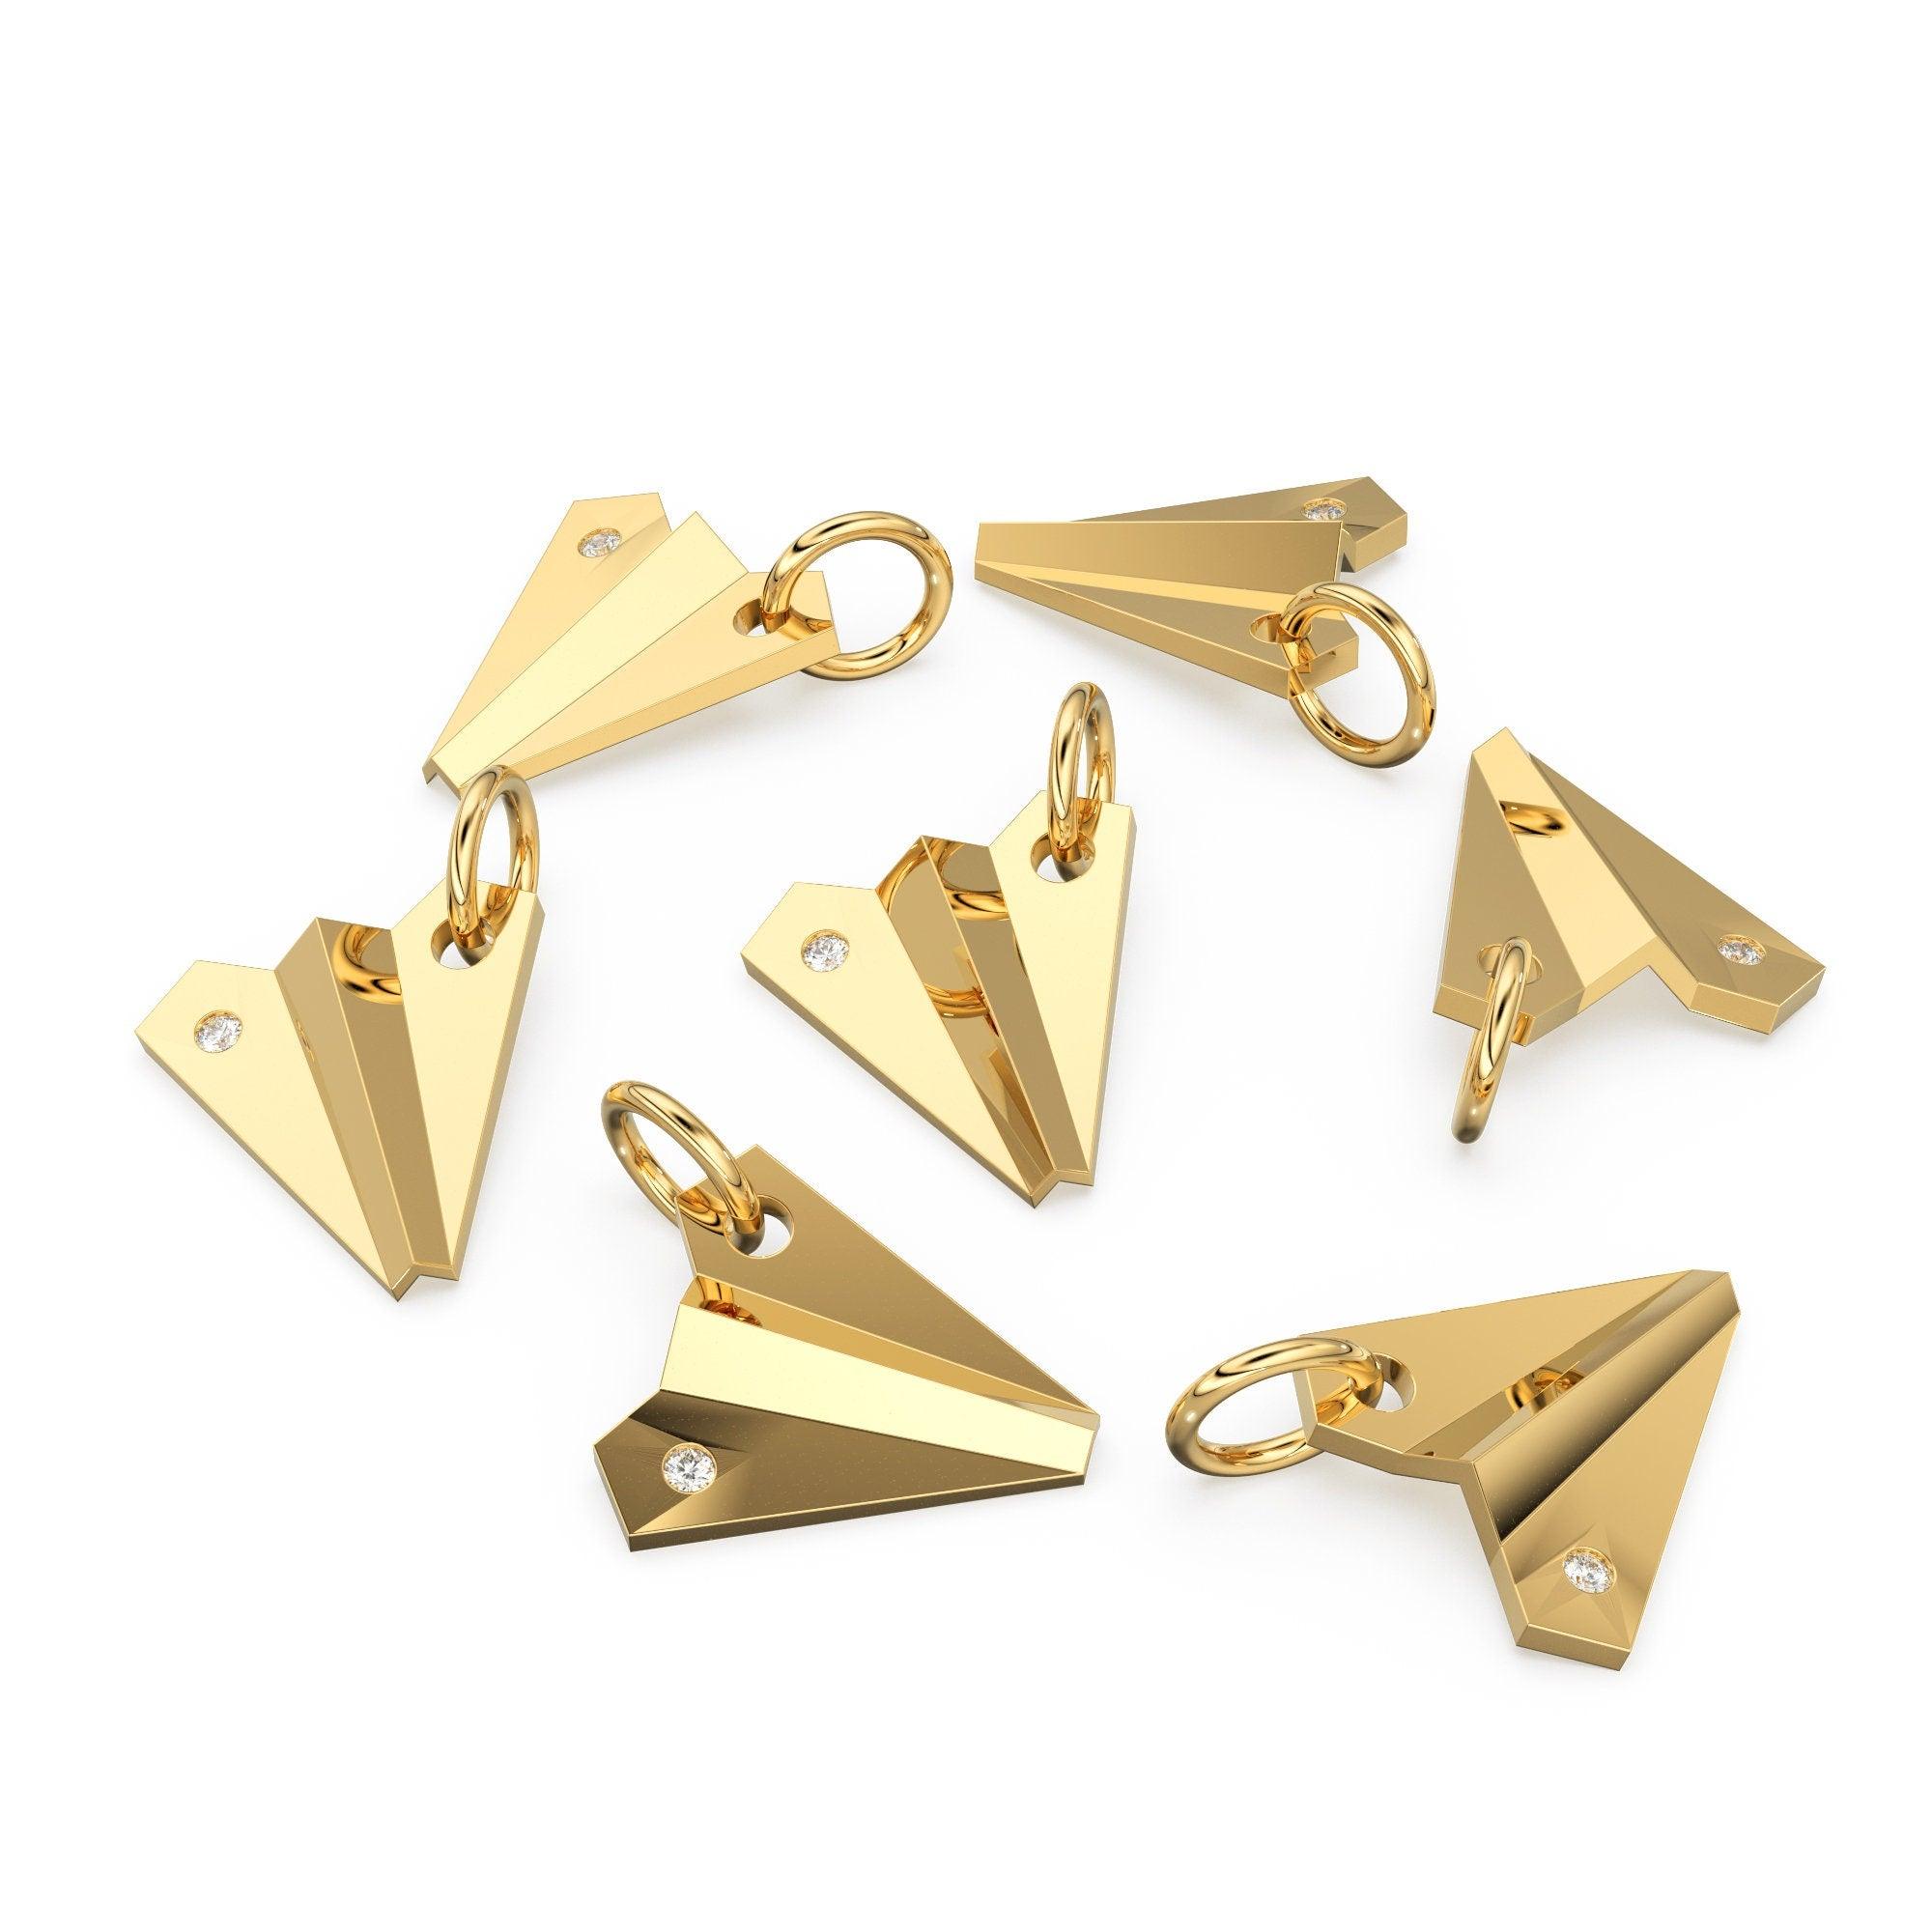 3 Dimensional Pyramid Stud Earrings in Solid 14K White Gold